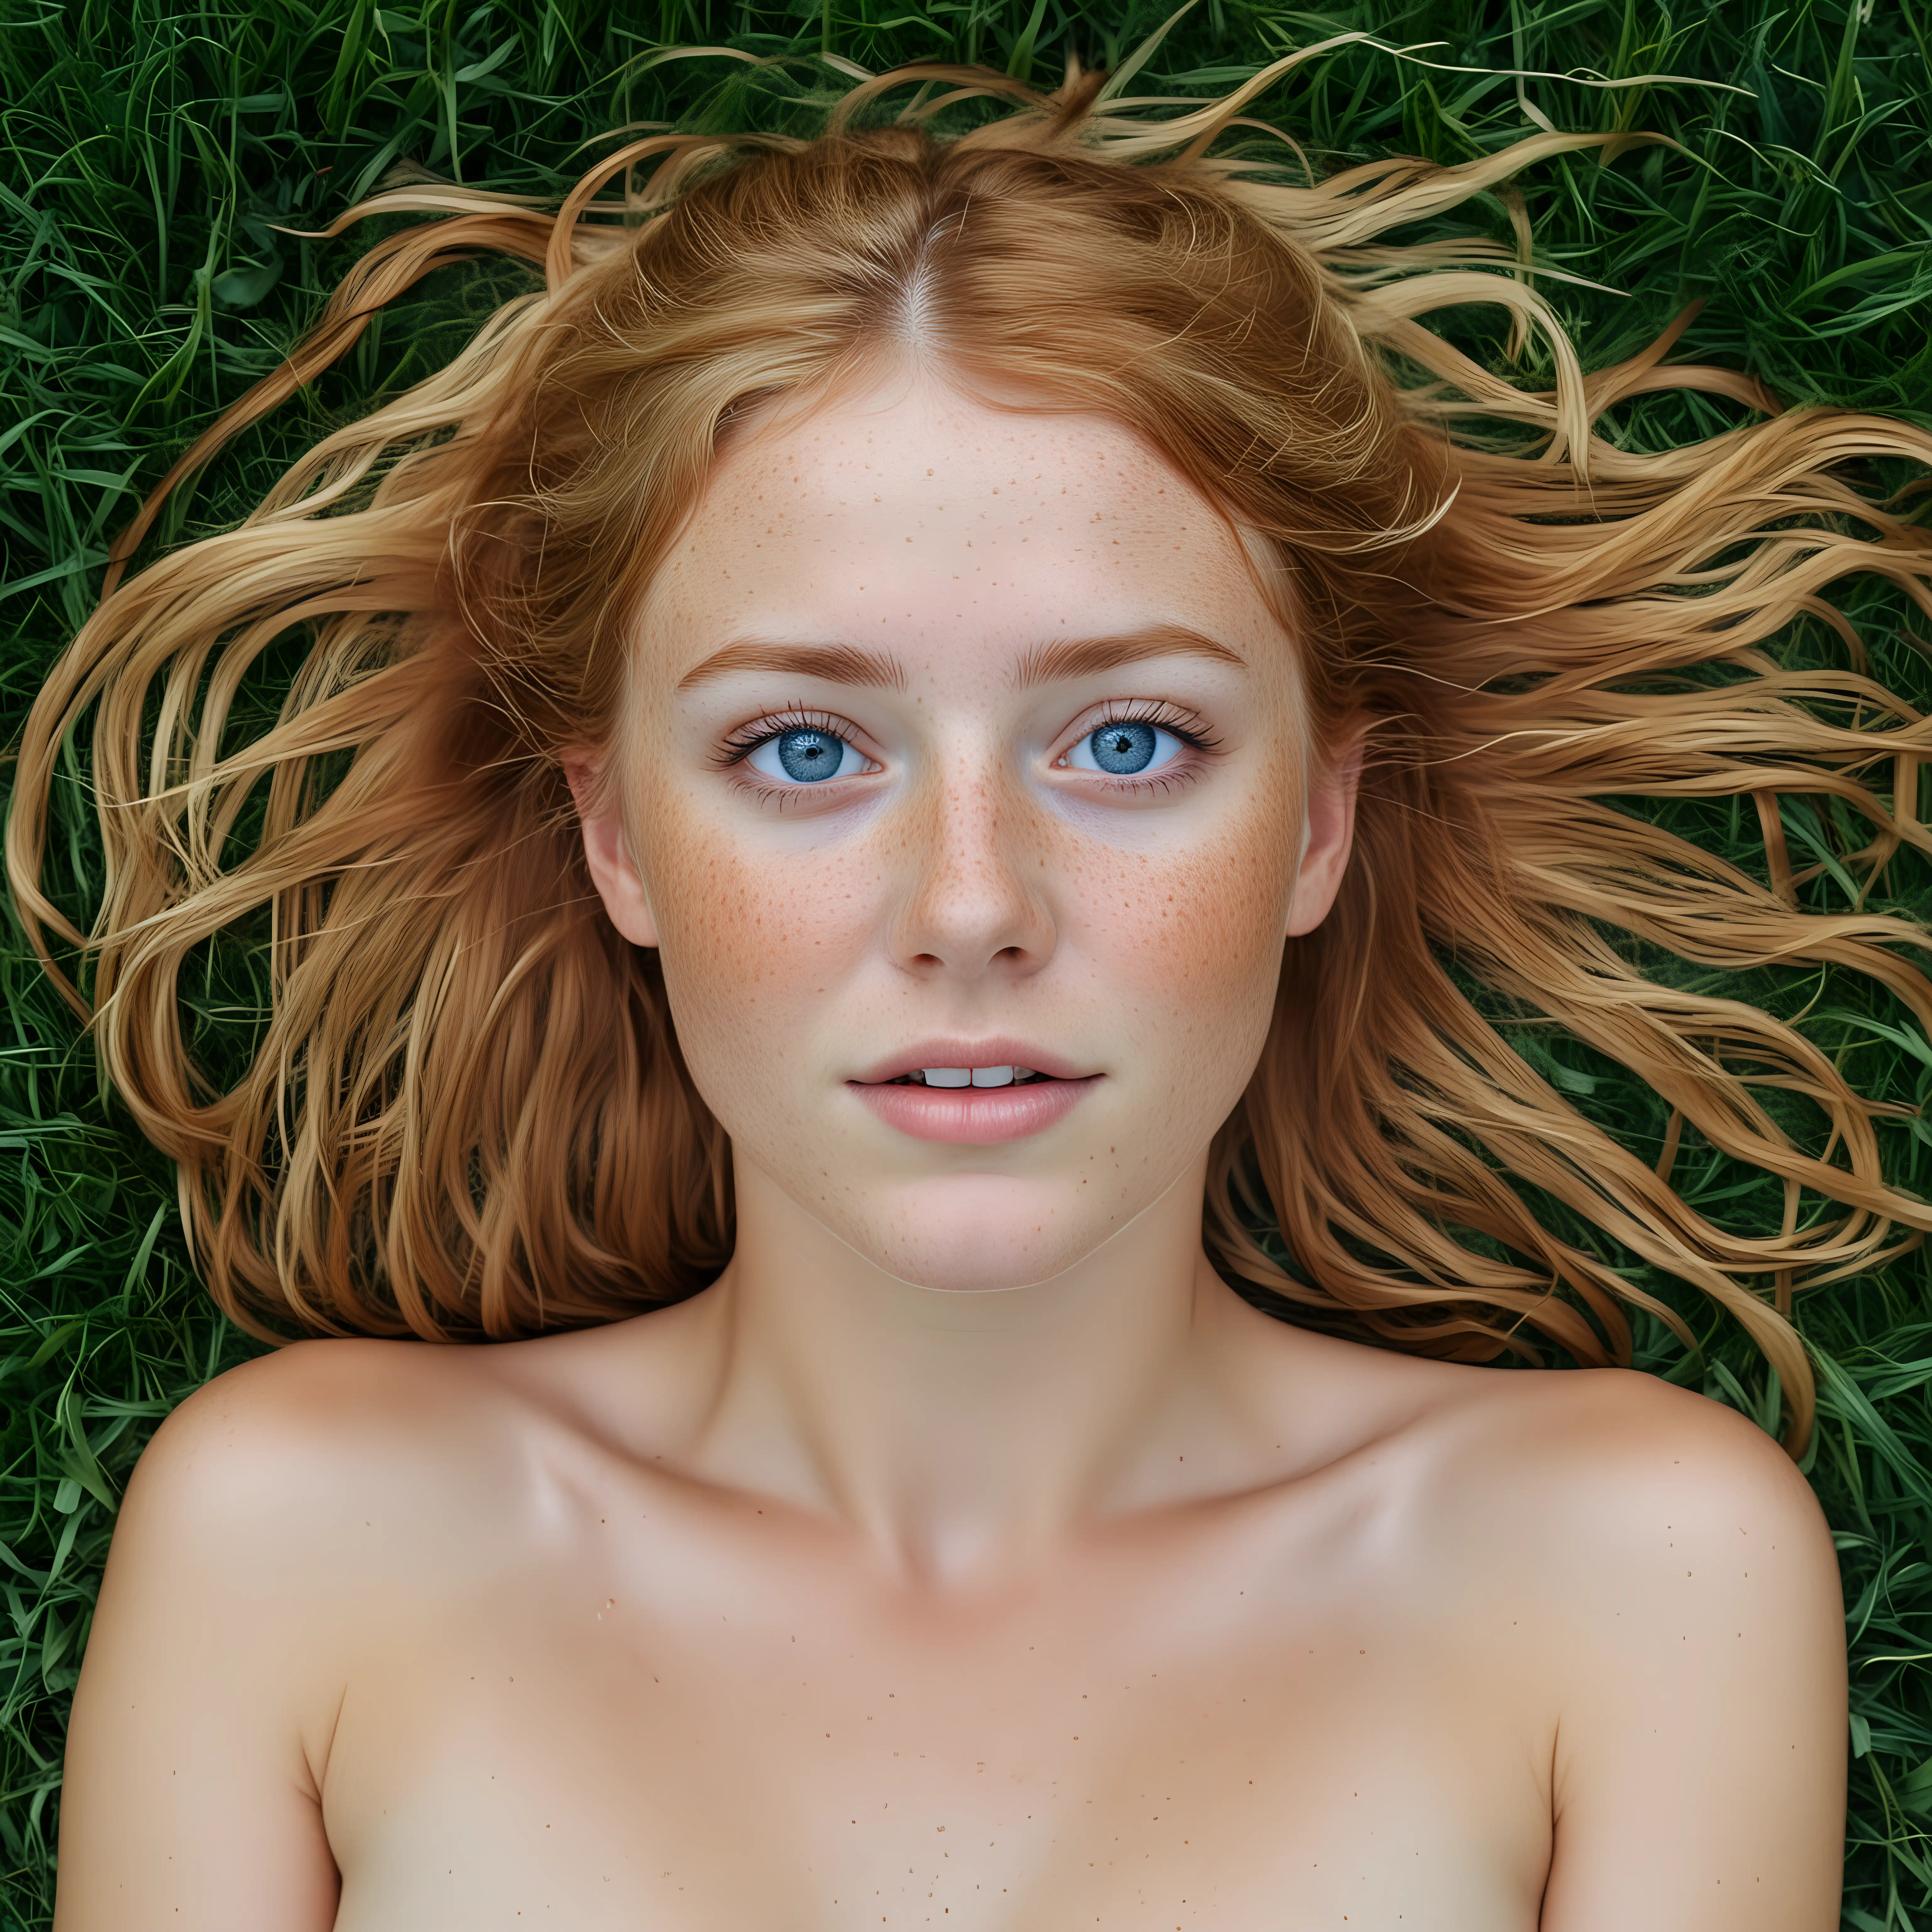 naked freckle face blonde blue-eyed girl laying on back in grass frightened look on her face